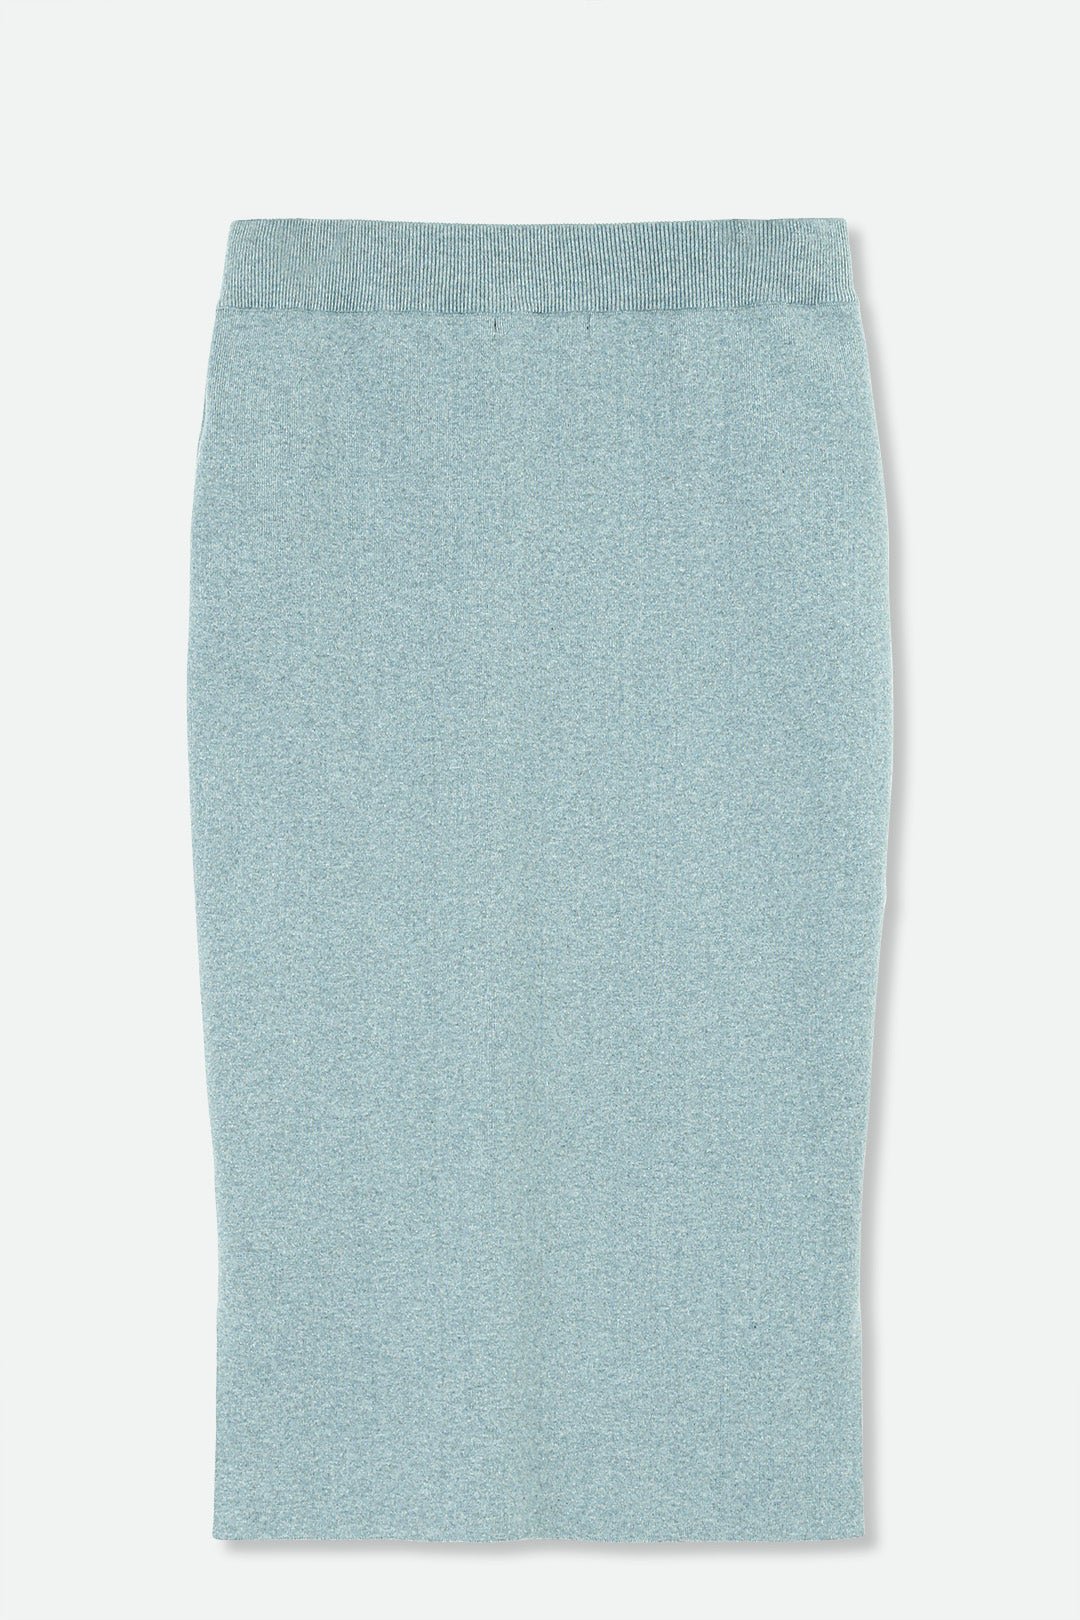 SICILY PENCIL SKIRT IN KNIT PIMA COTTON STRETCH IN BLUE HEATHER - Jarbo